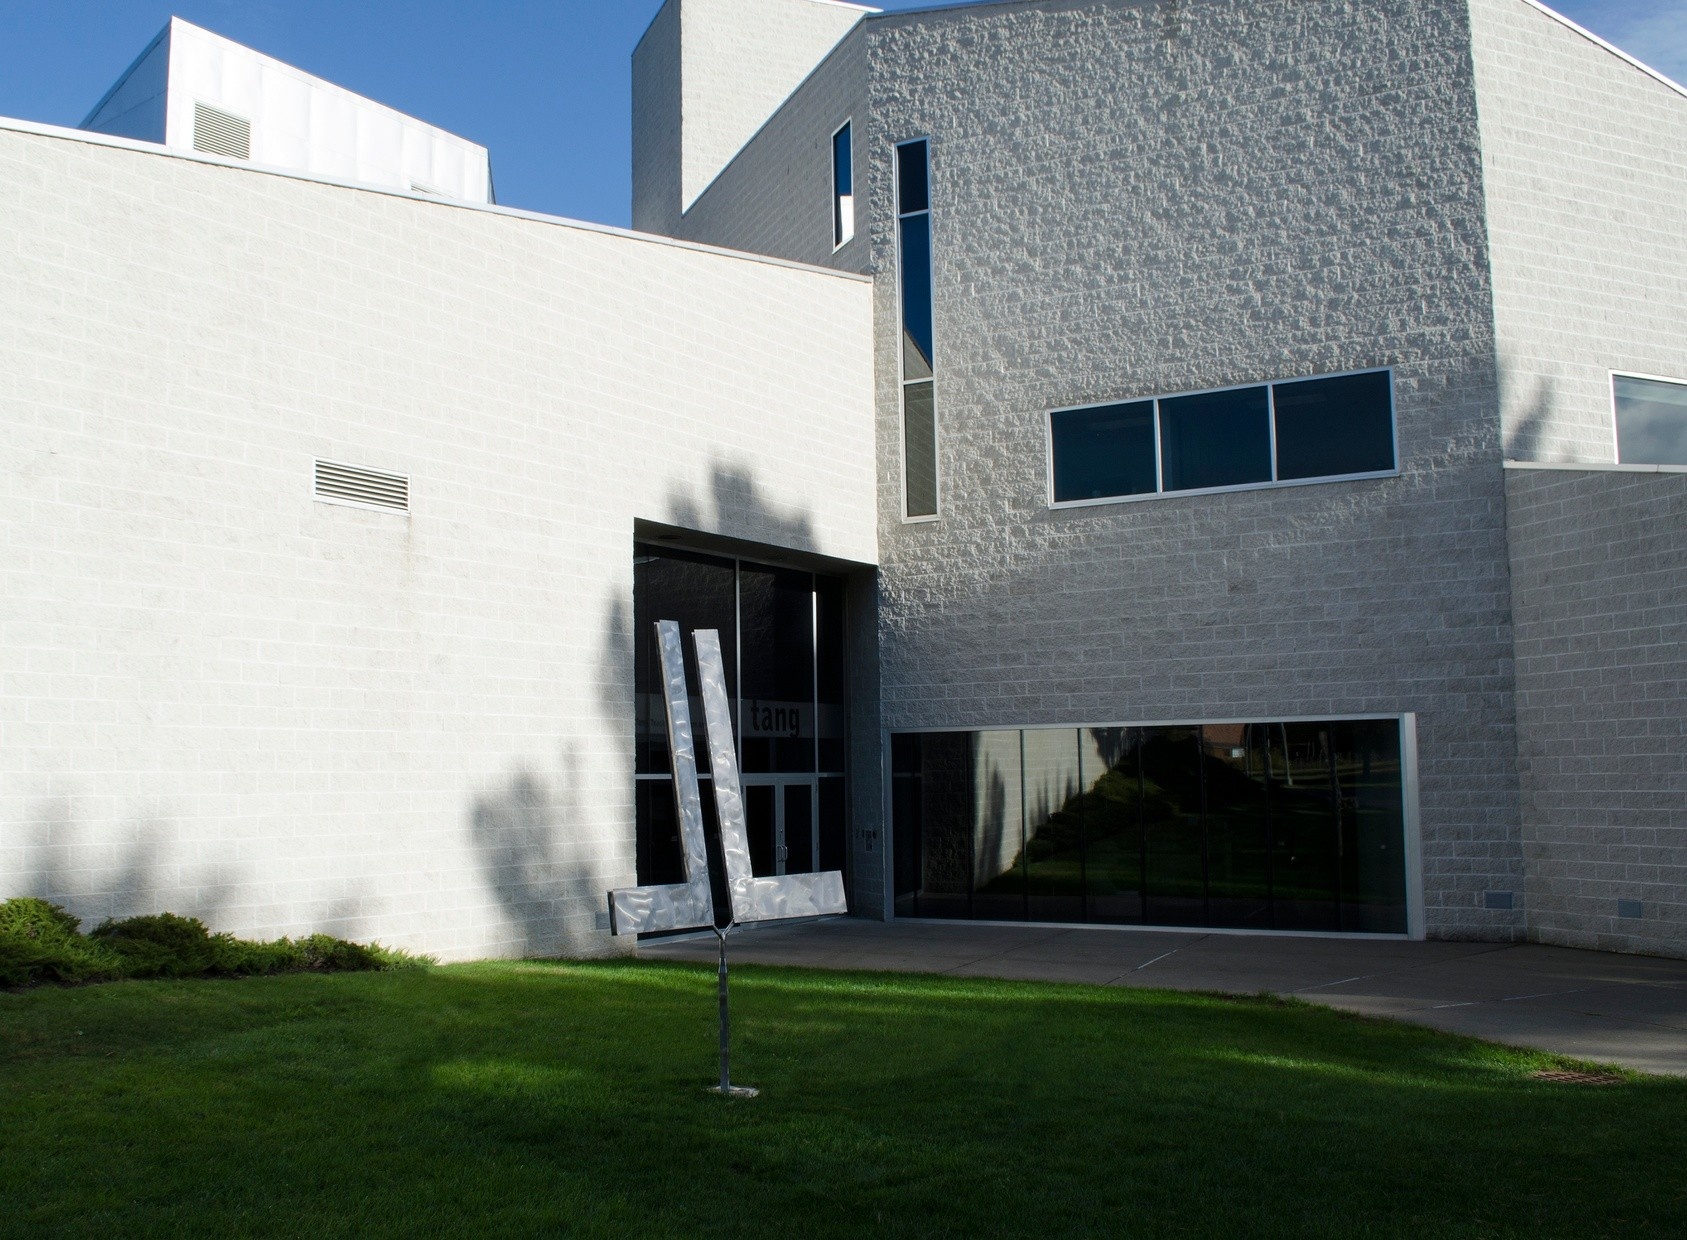 A sculpture sits in the grass outside of a gray brick building.